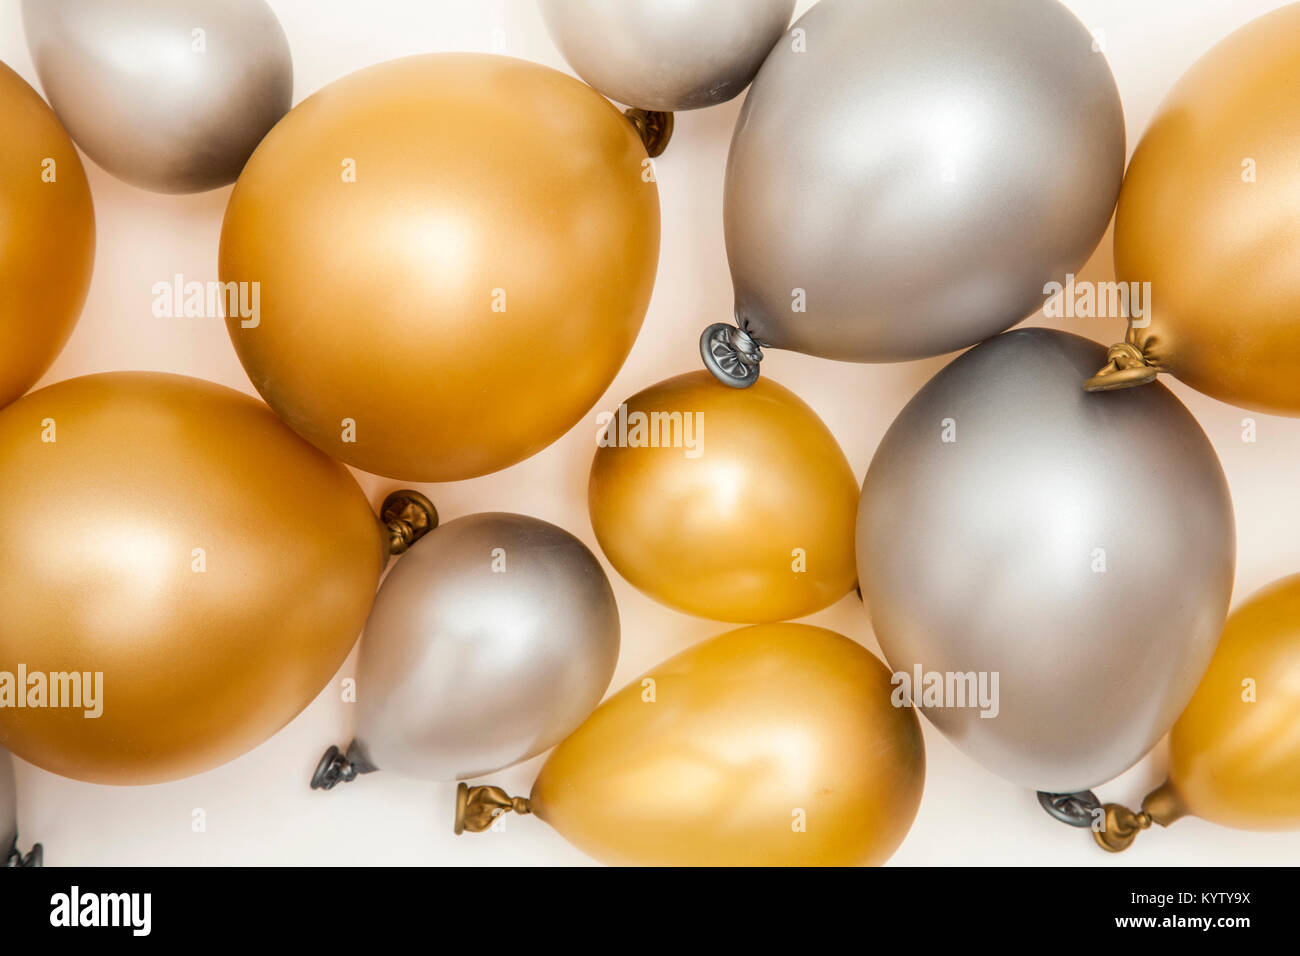 Gold and silver party celebration balloons on a plain background Stock Photo